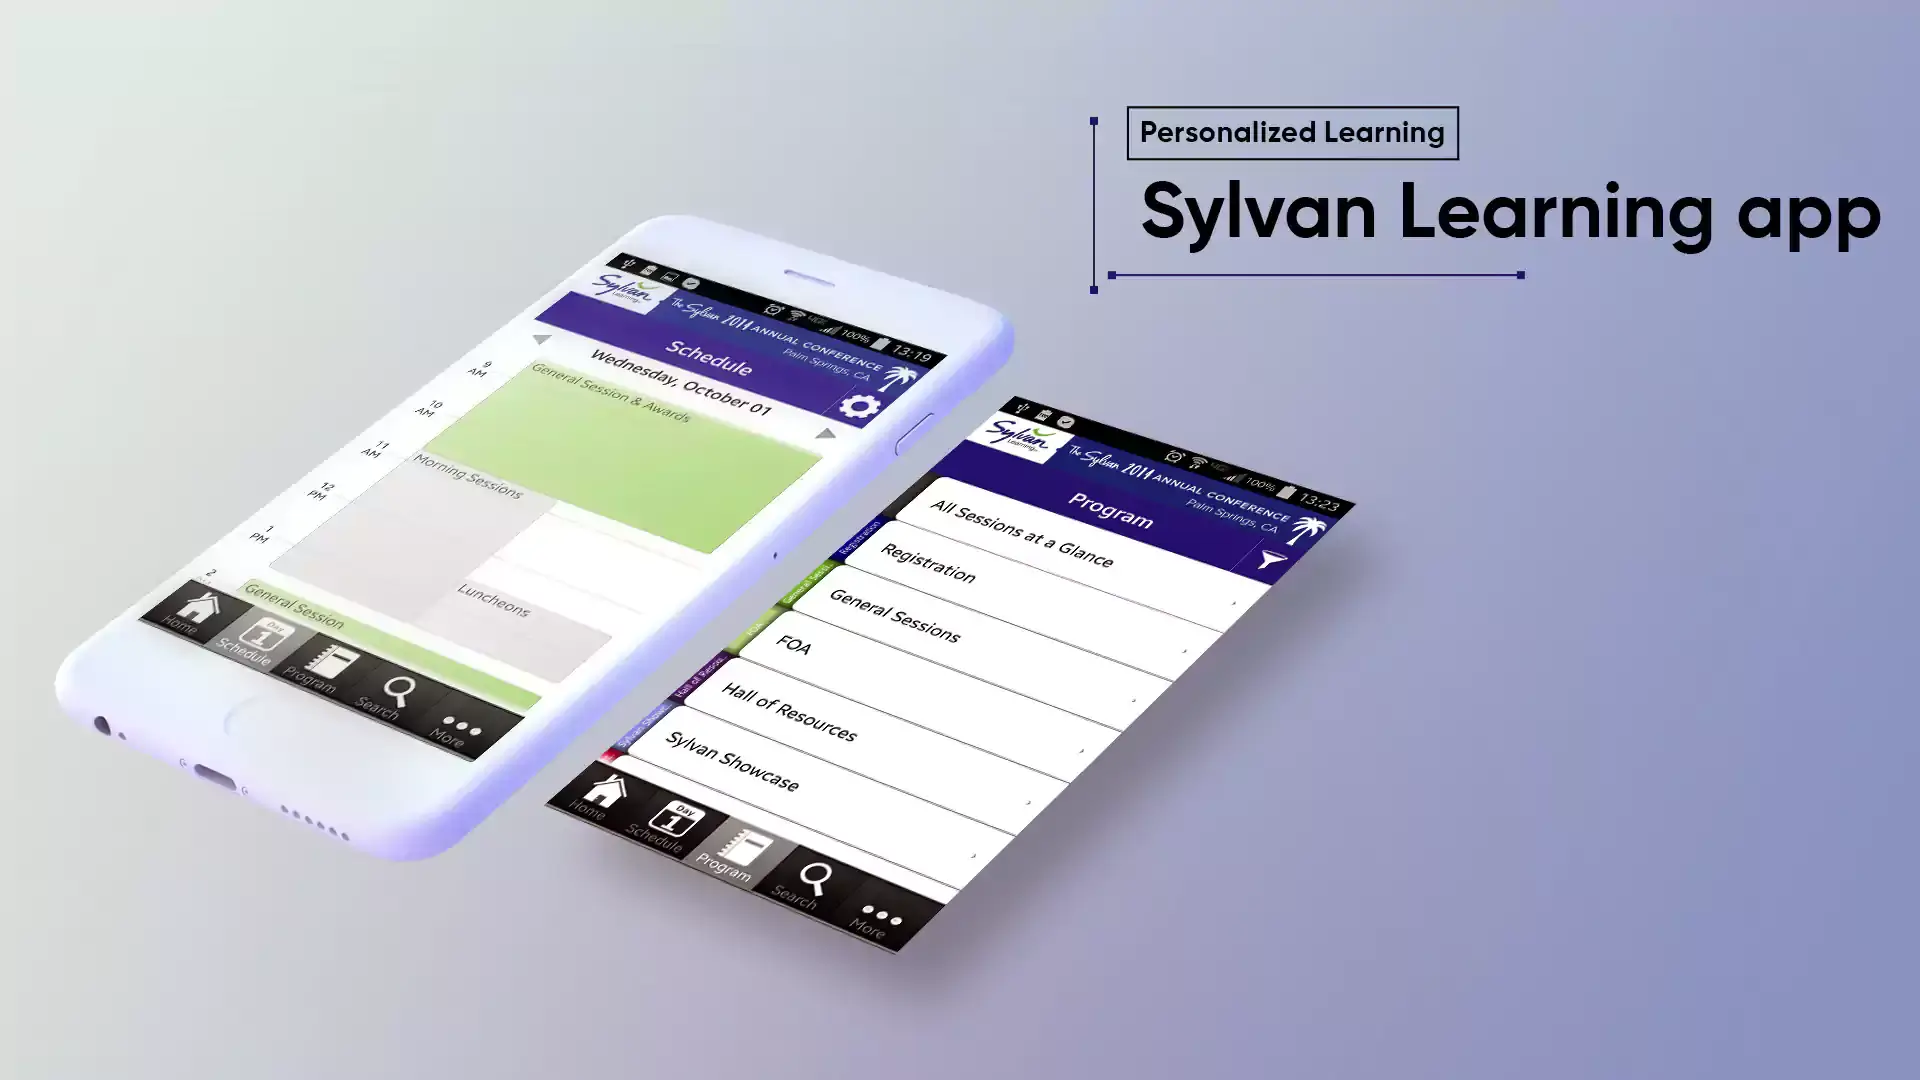 Personalized Learning Sylvan Learning app